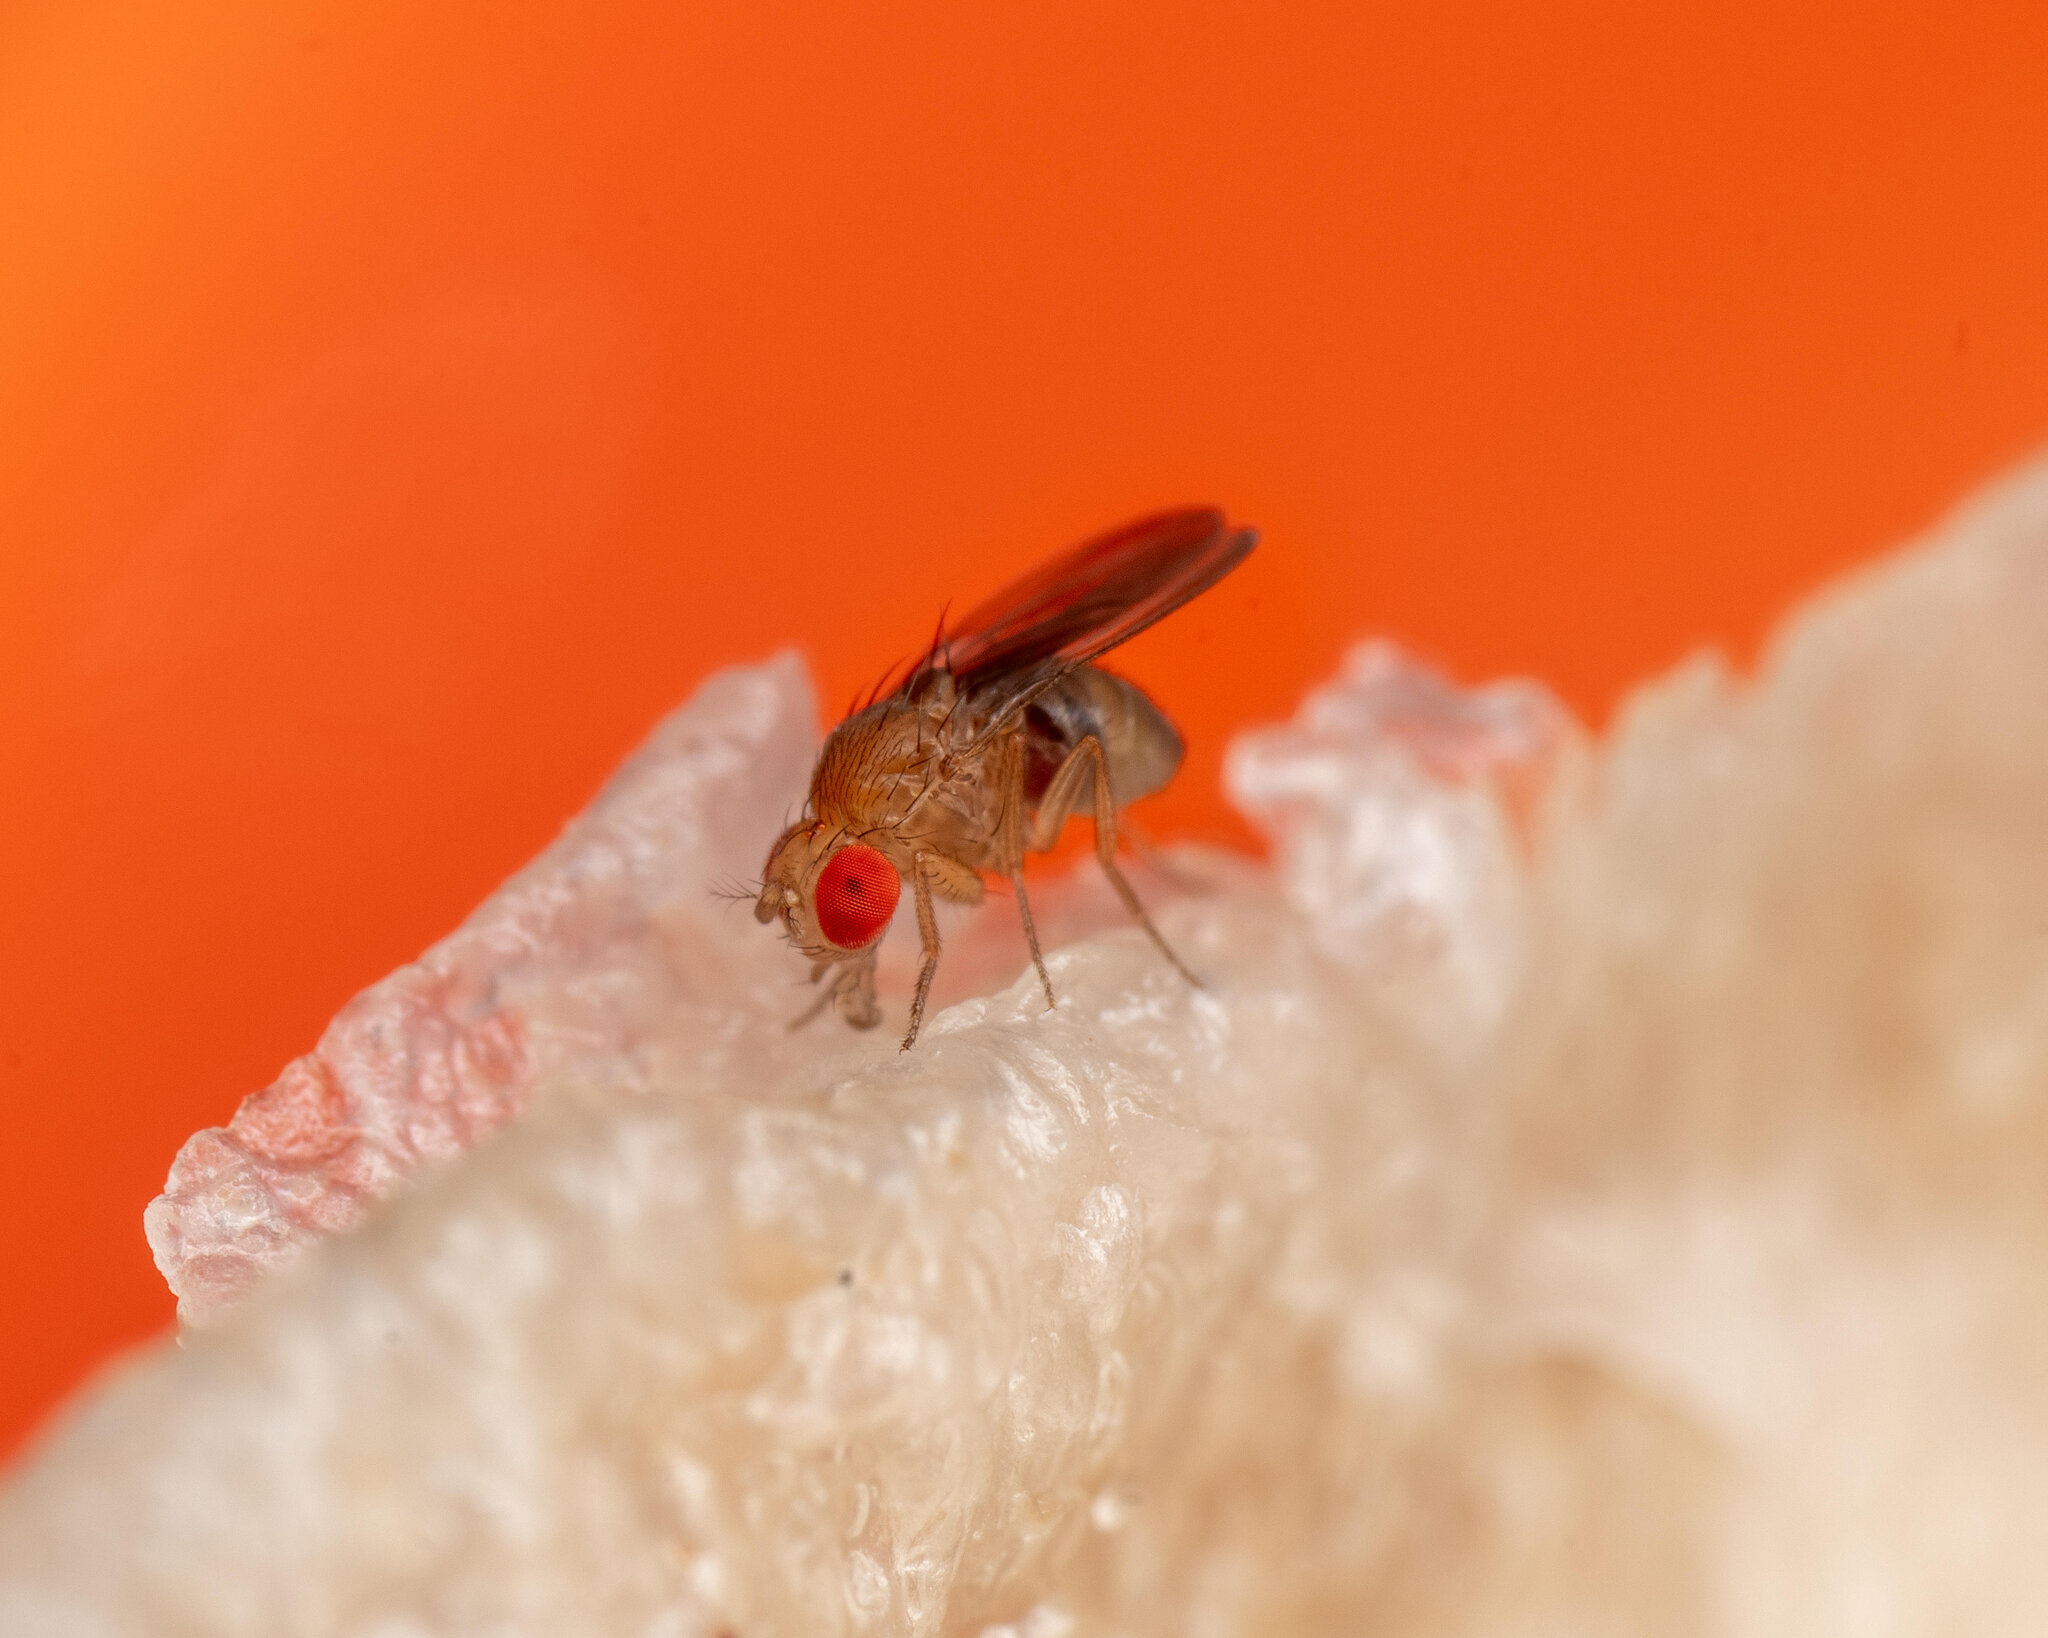 How many neurons are there in the brain of a fruit fly?